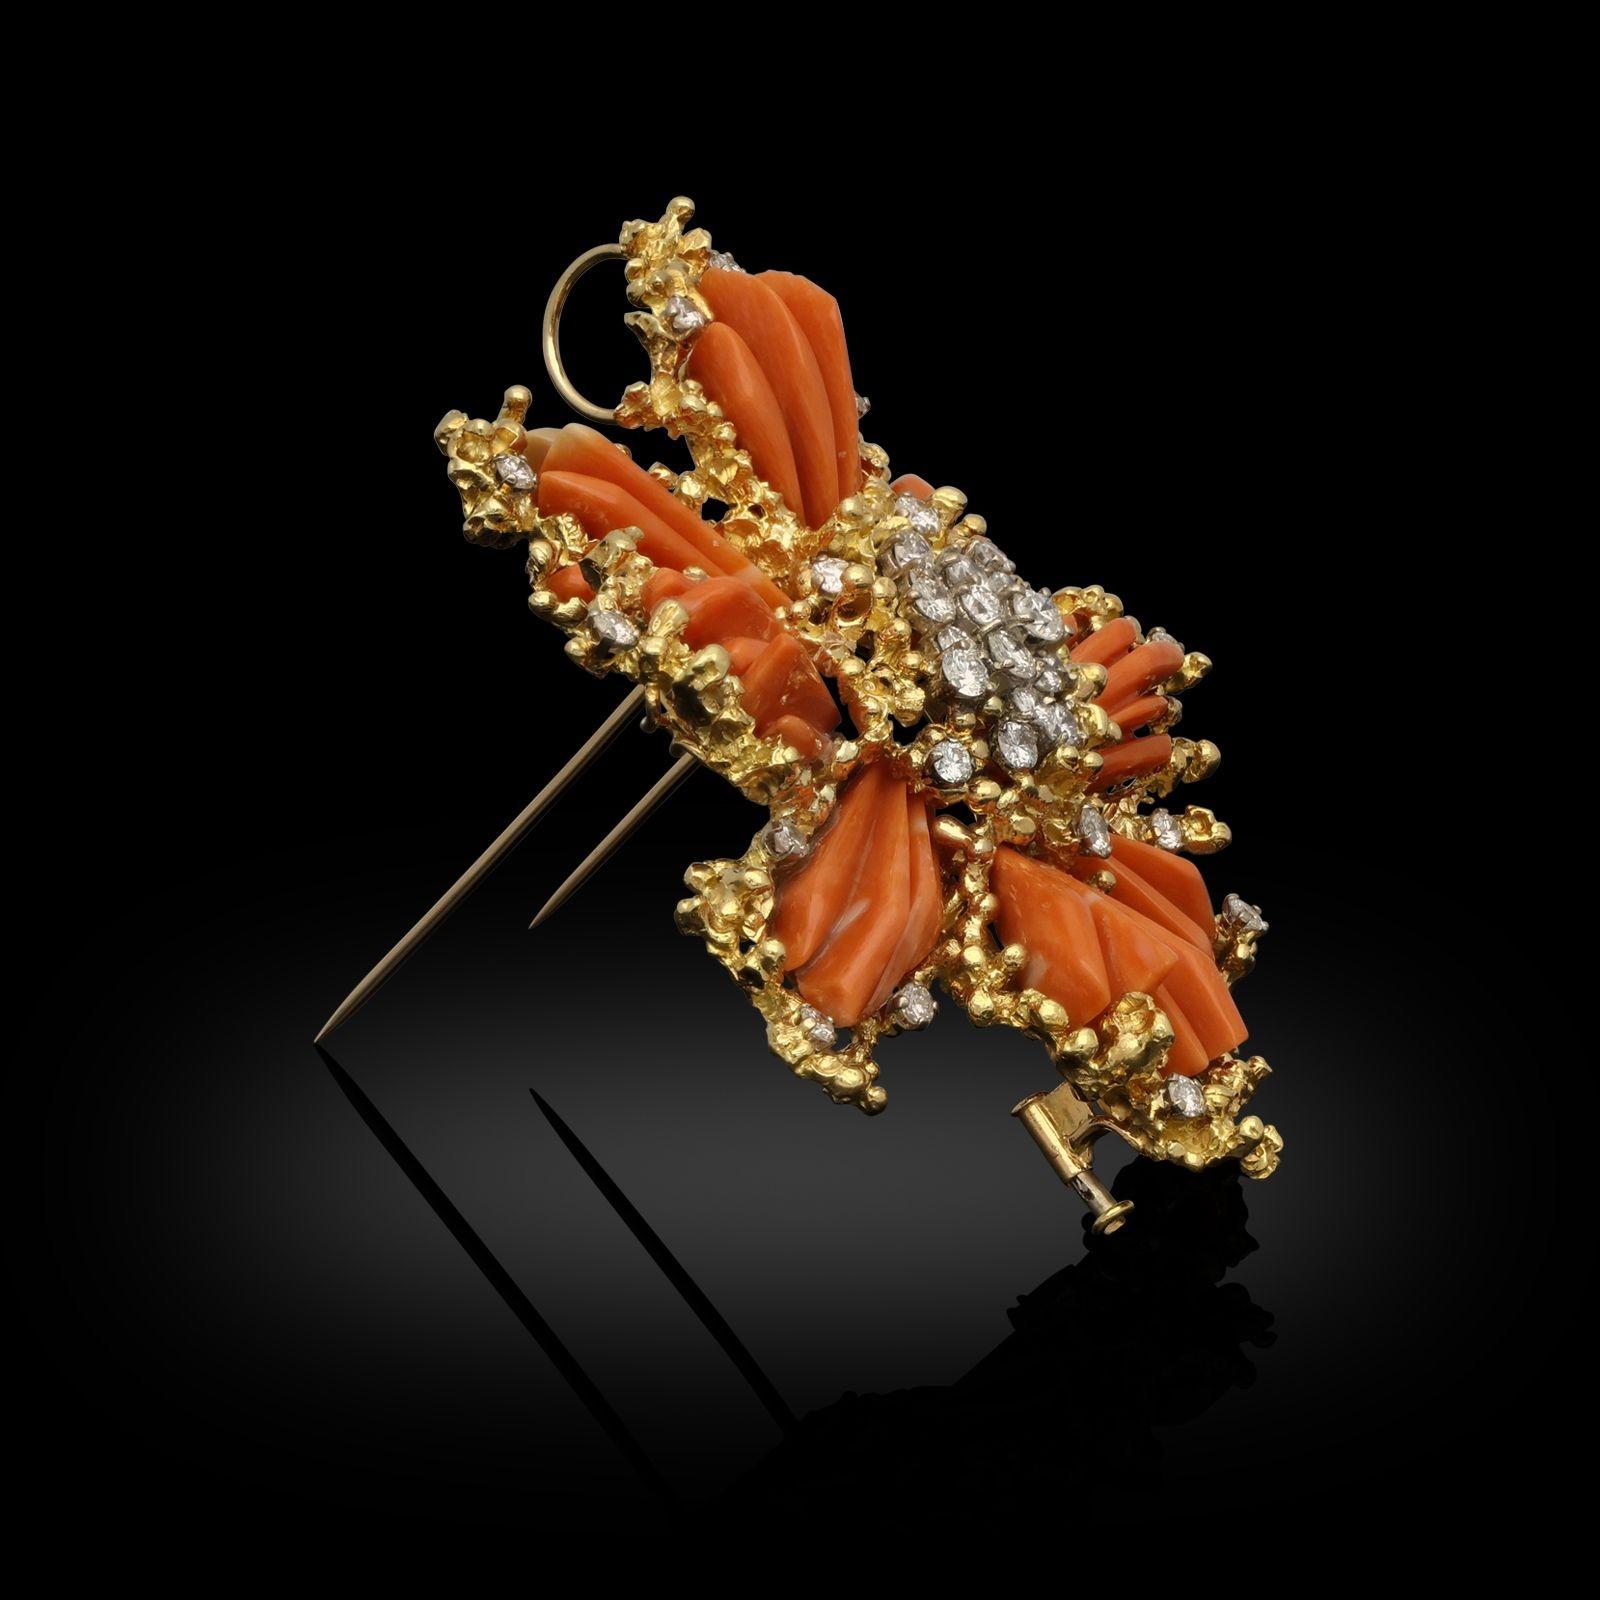 An 18ct yellow gold, coral and diamond brooch by Kutchinsky 1969. The clip brooch is a star-burst design and formed of a central cluster of round brilliant cut diamonds in claw settings within an organic textured gold surround. Eight pieces of